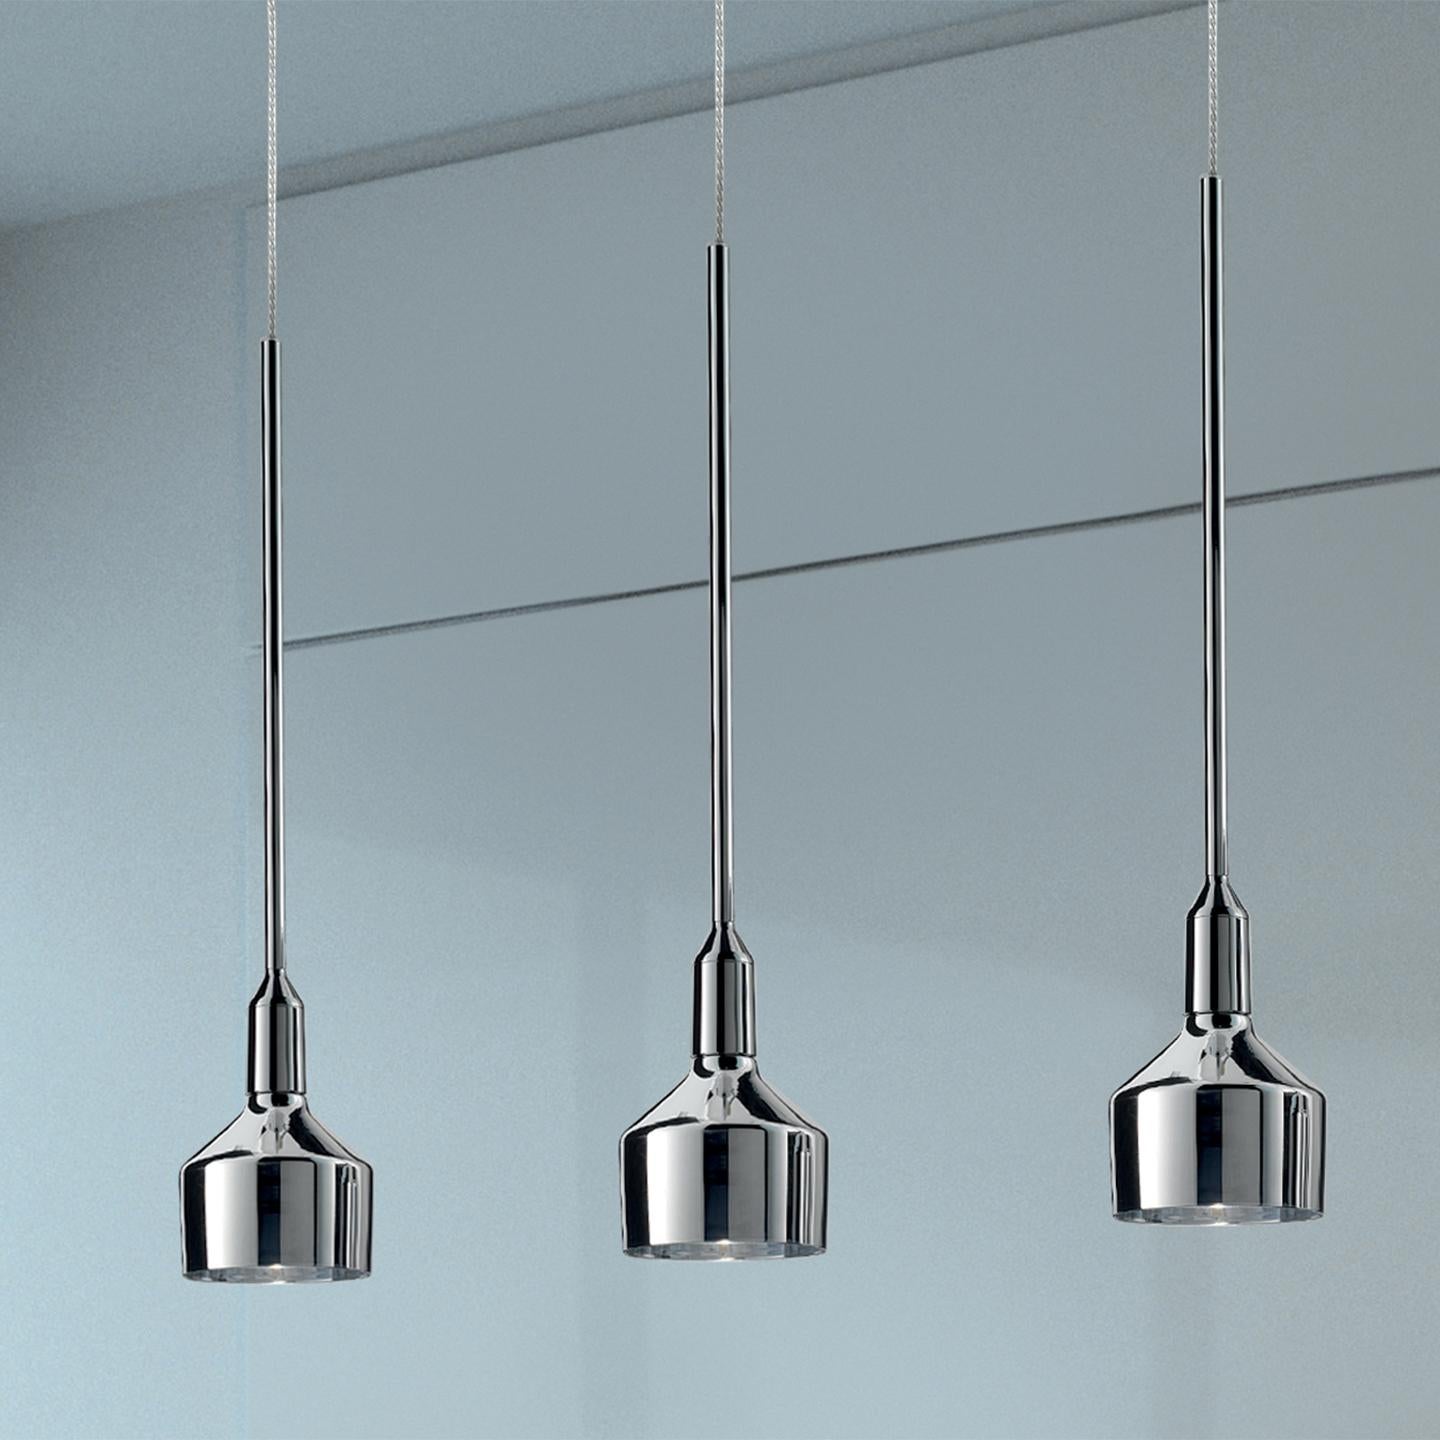 Arik Levy designed the Beamer pendant in 2013 to be a clever, multivariable pendant system. While the Beamer Pendant looks great as a standalone, the versatile pendant can be customized into three and five multipoint systems and comes in two sizes.